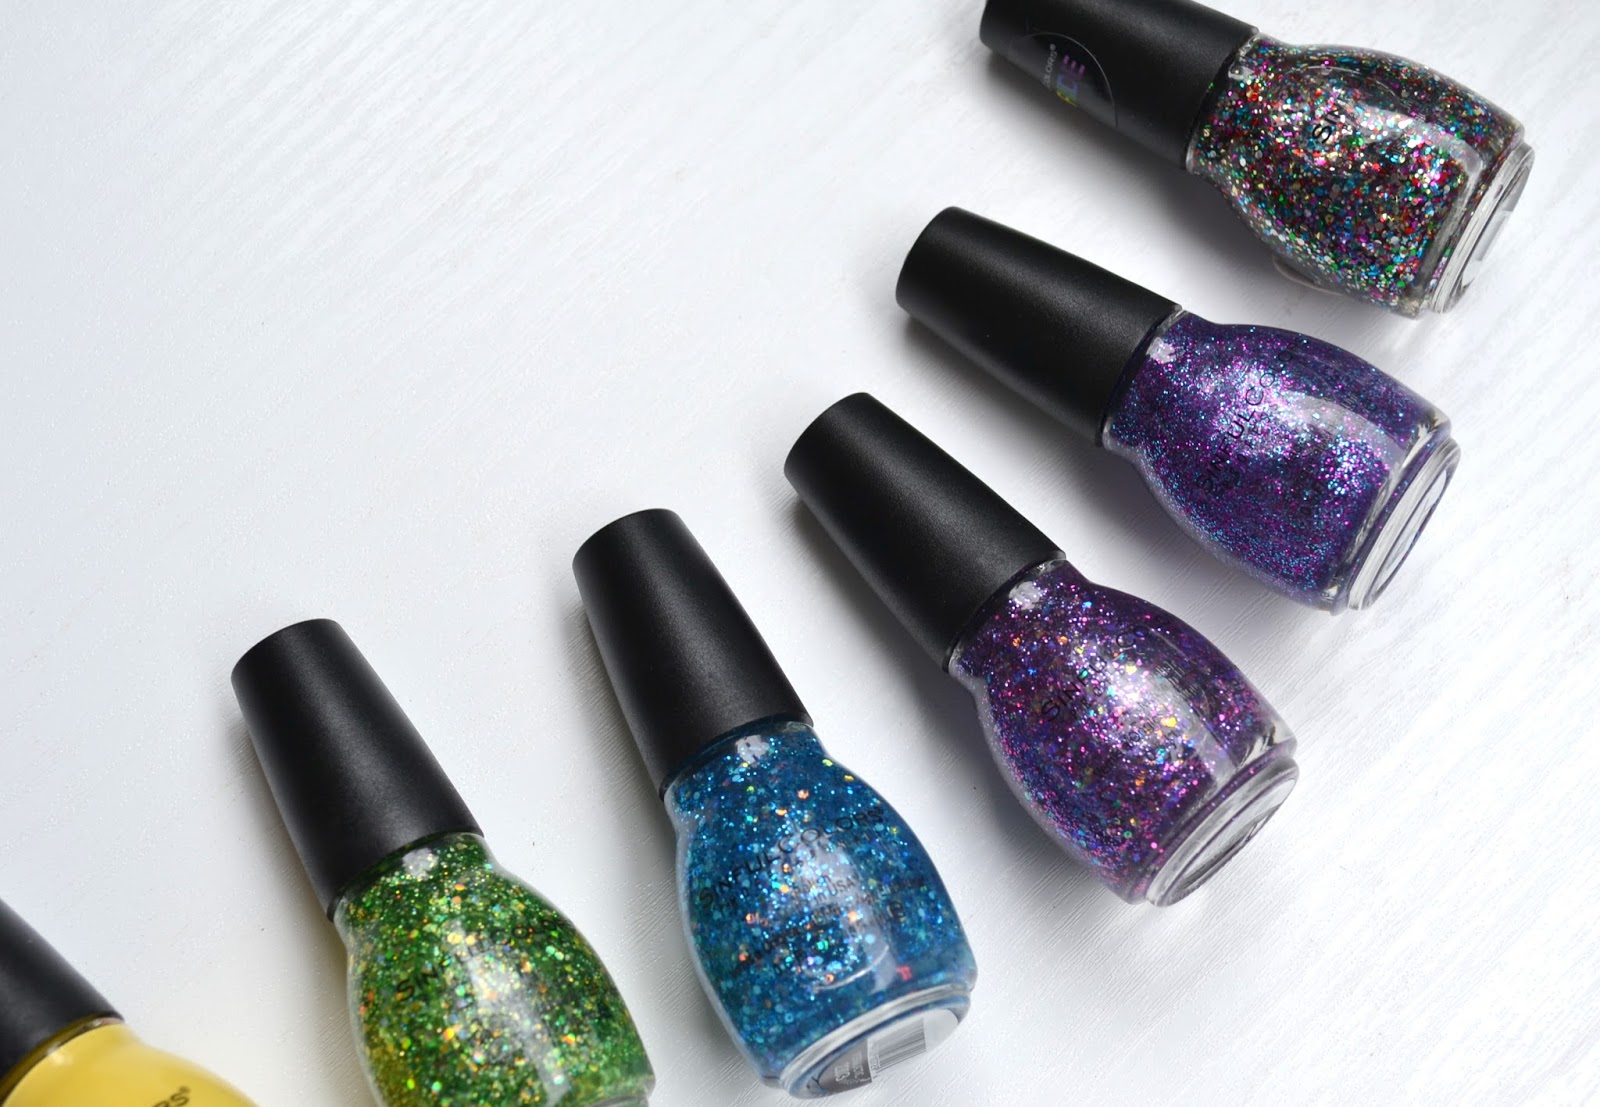 2. Sinful Colors Nail Polish - Street Legal - wide 3